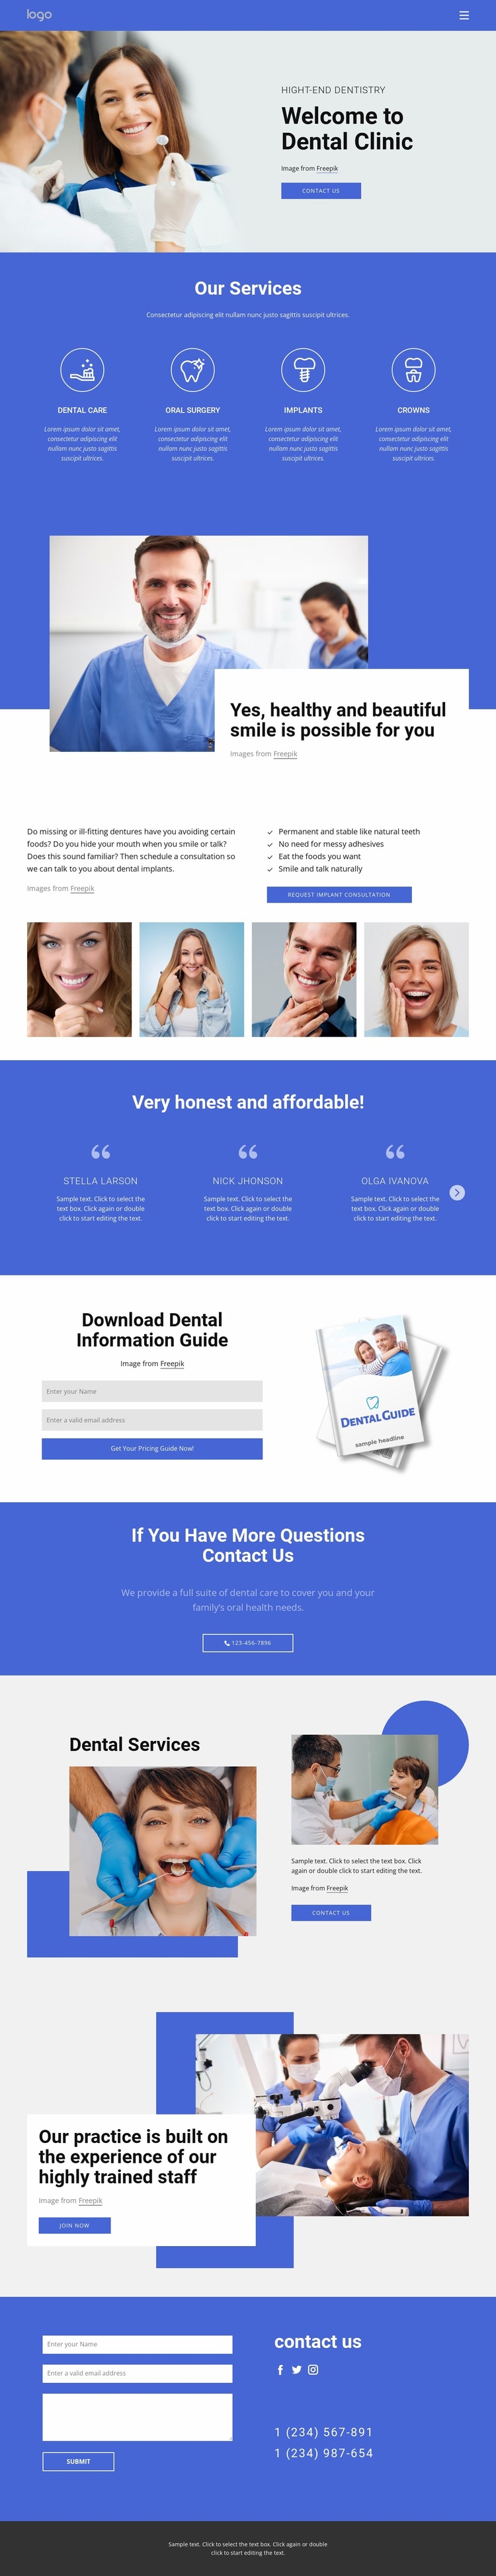 Welcome to dental clinic Ecommerce Website Design